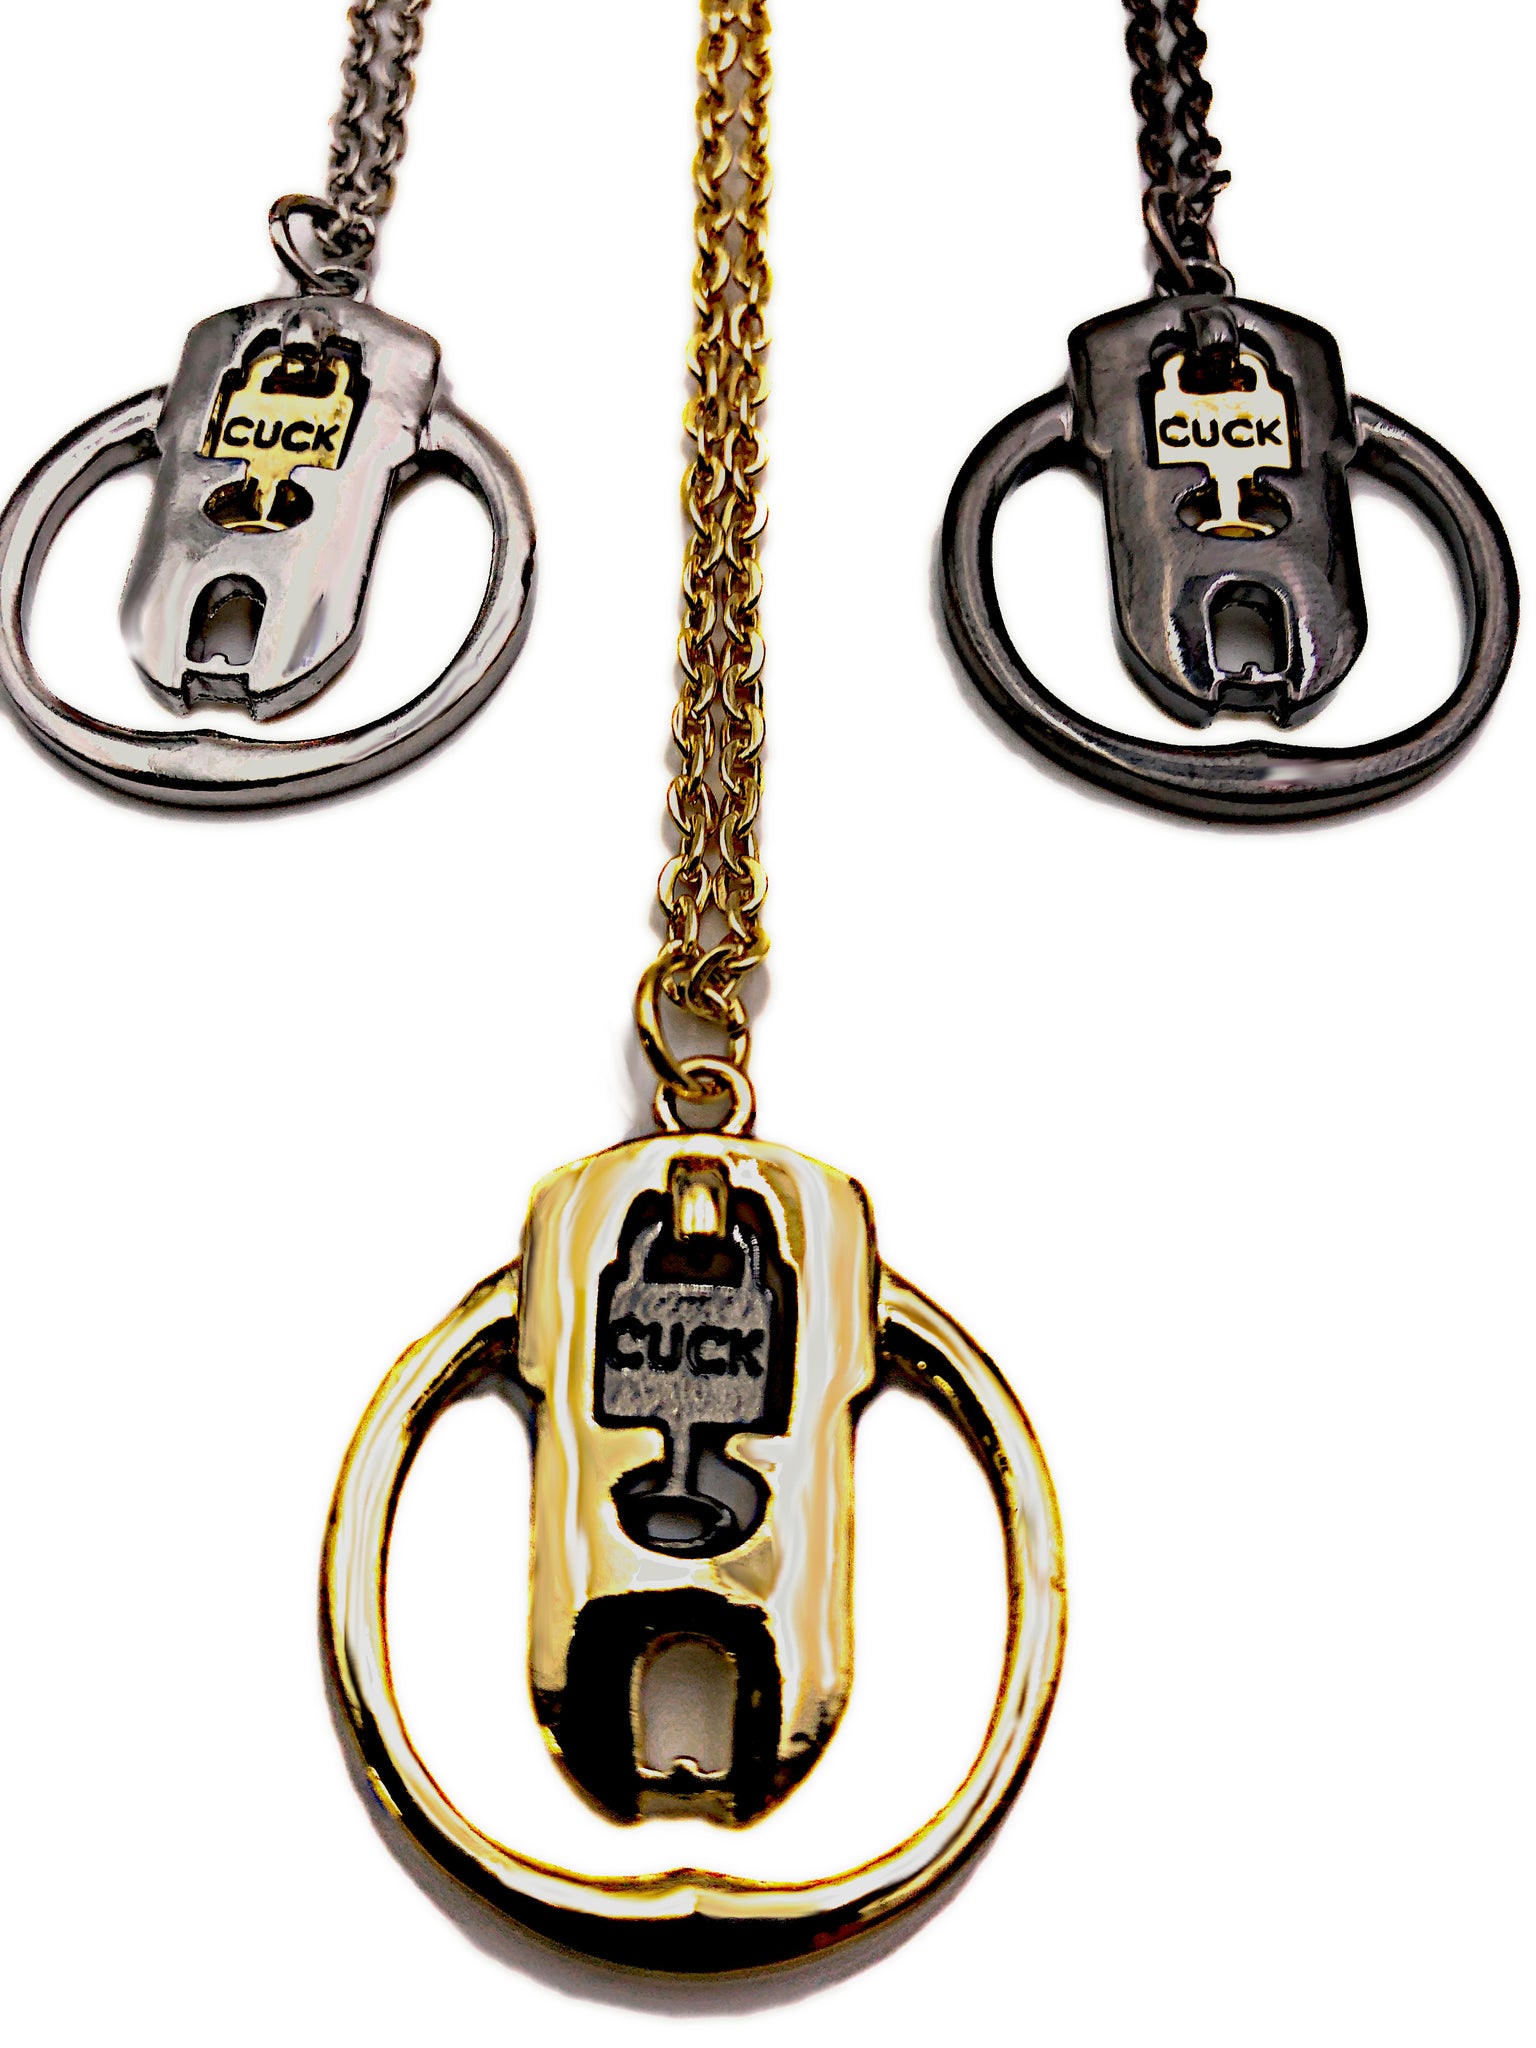 Sissy Cuckold Cuck Locked Up Chastity Charm Necklace